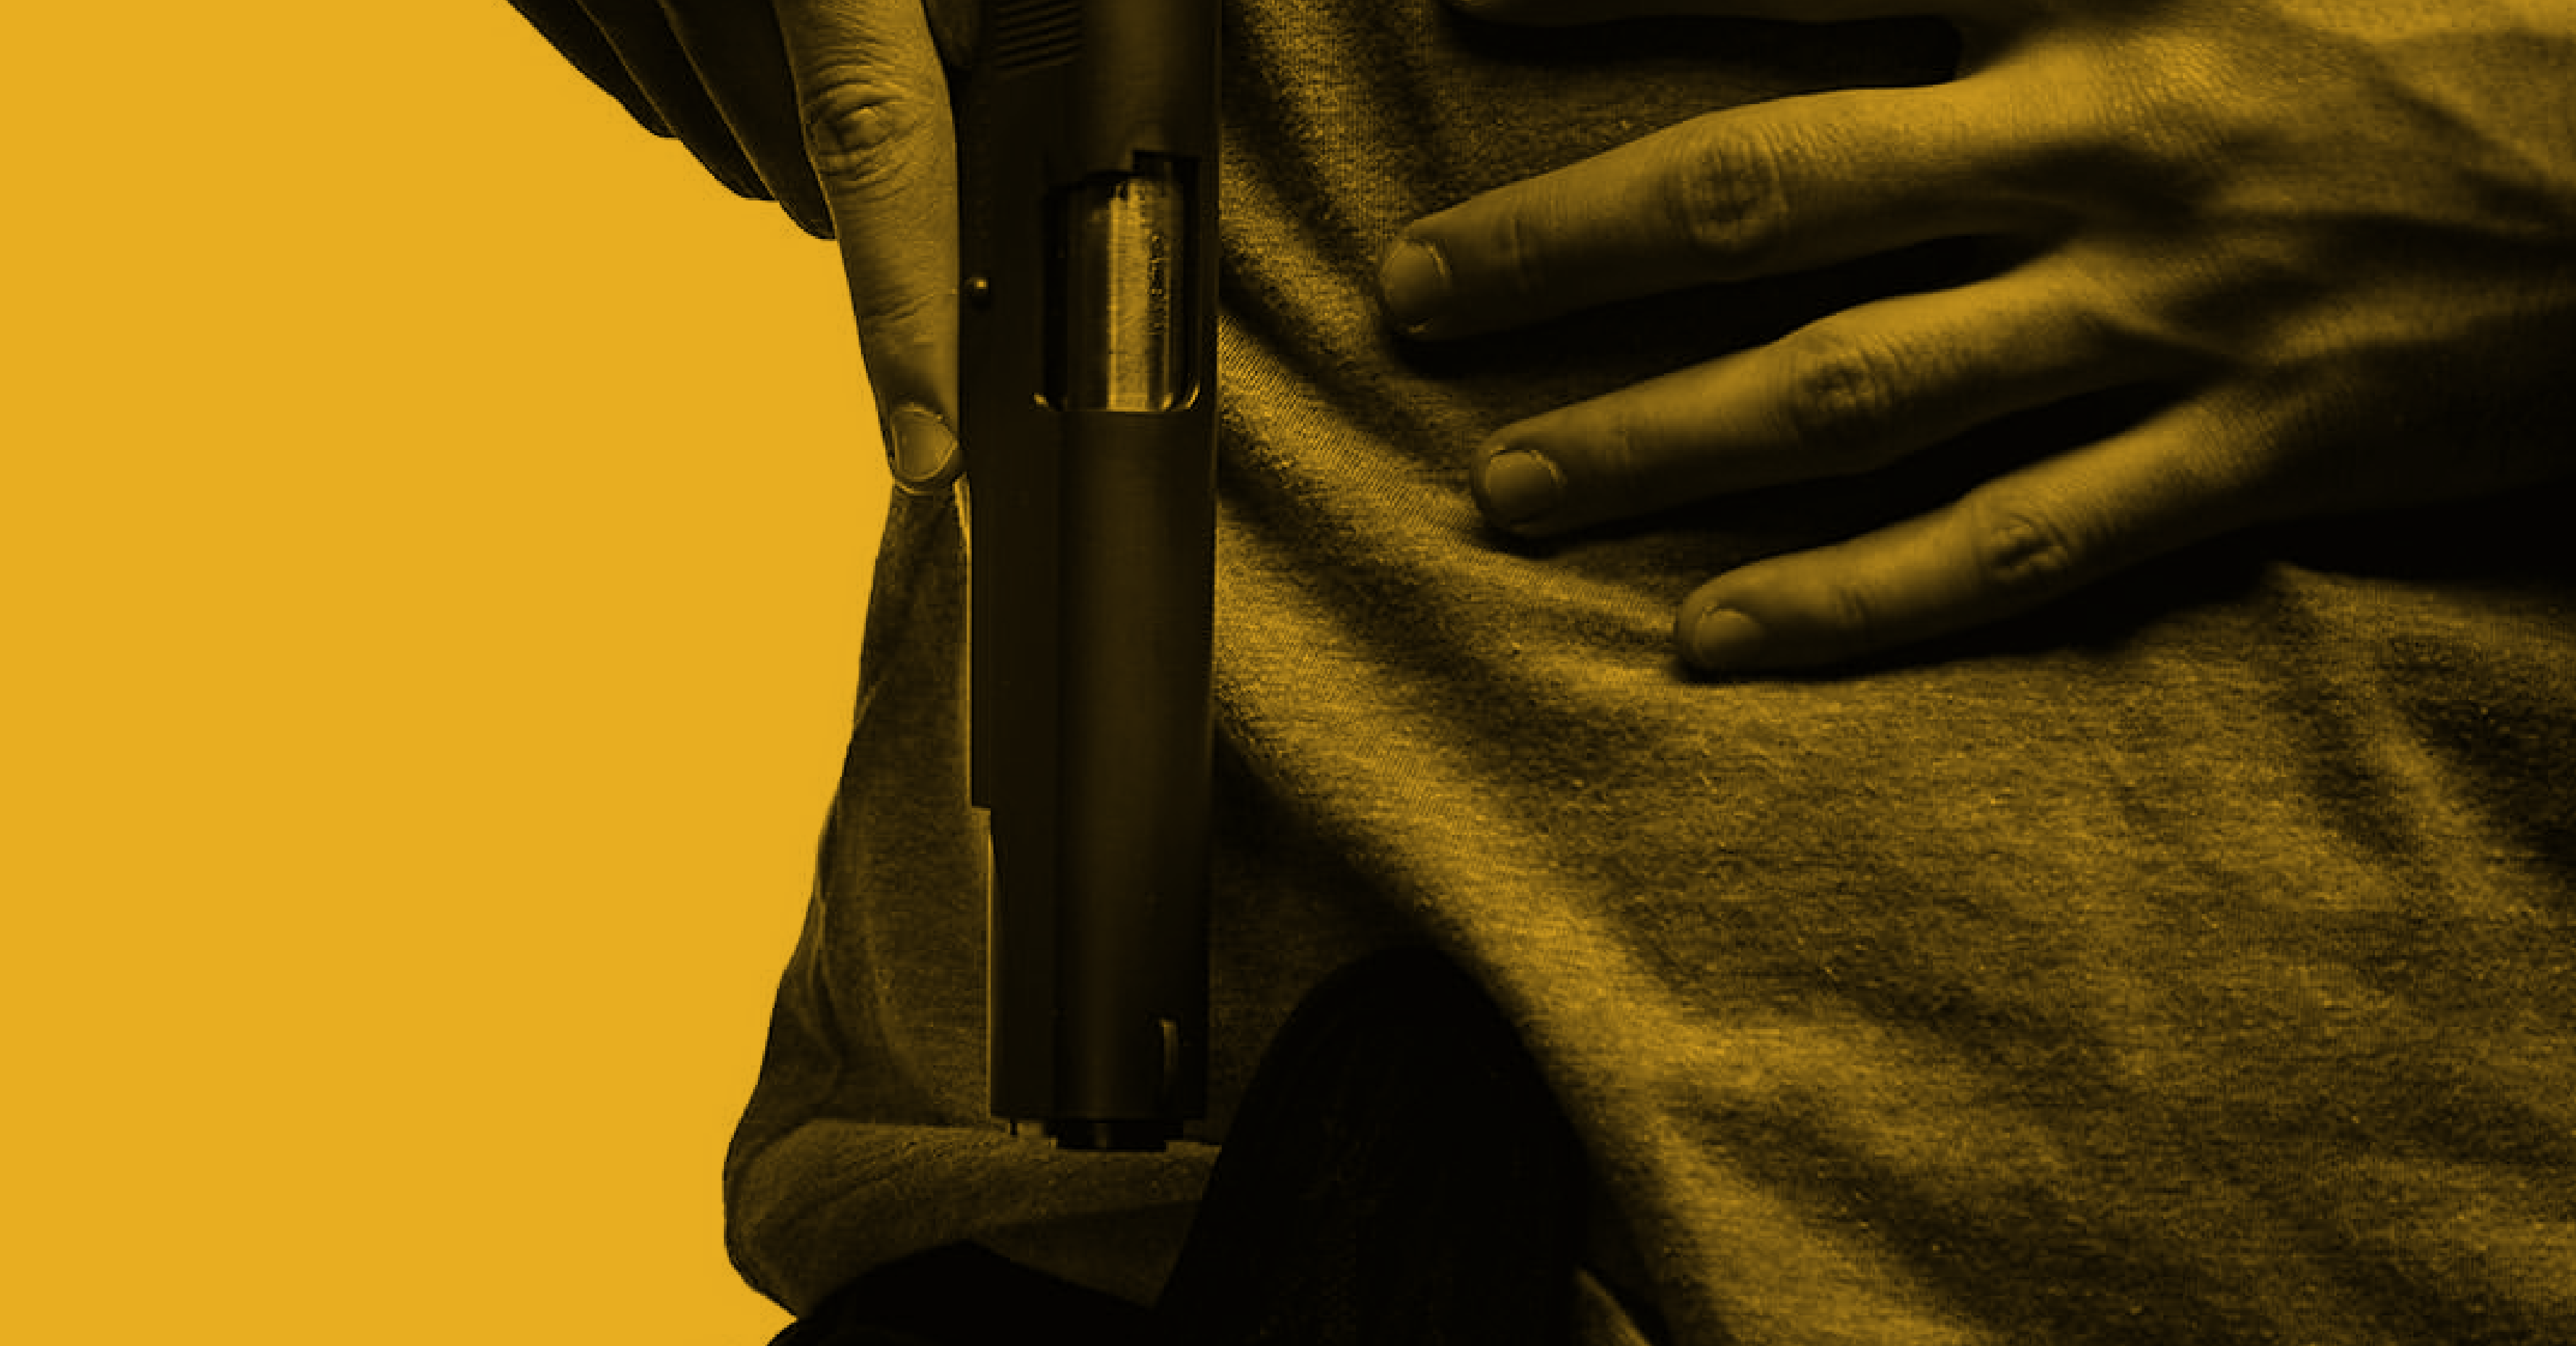 A Strapping (and Strapped) Man: A quick guide to clothing selection for concealed carry